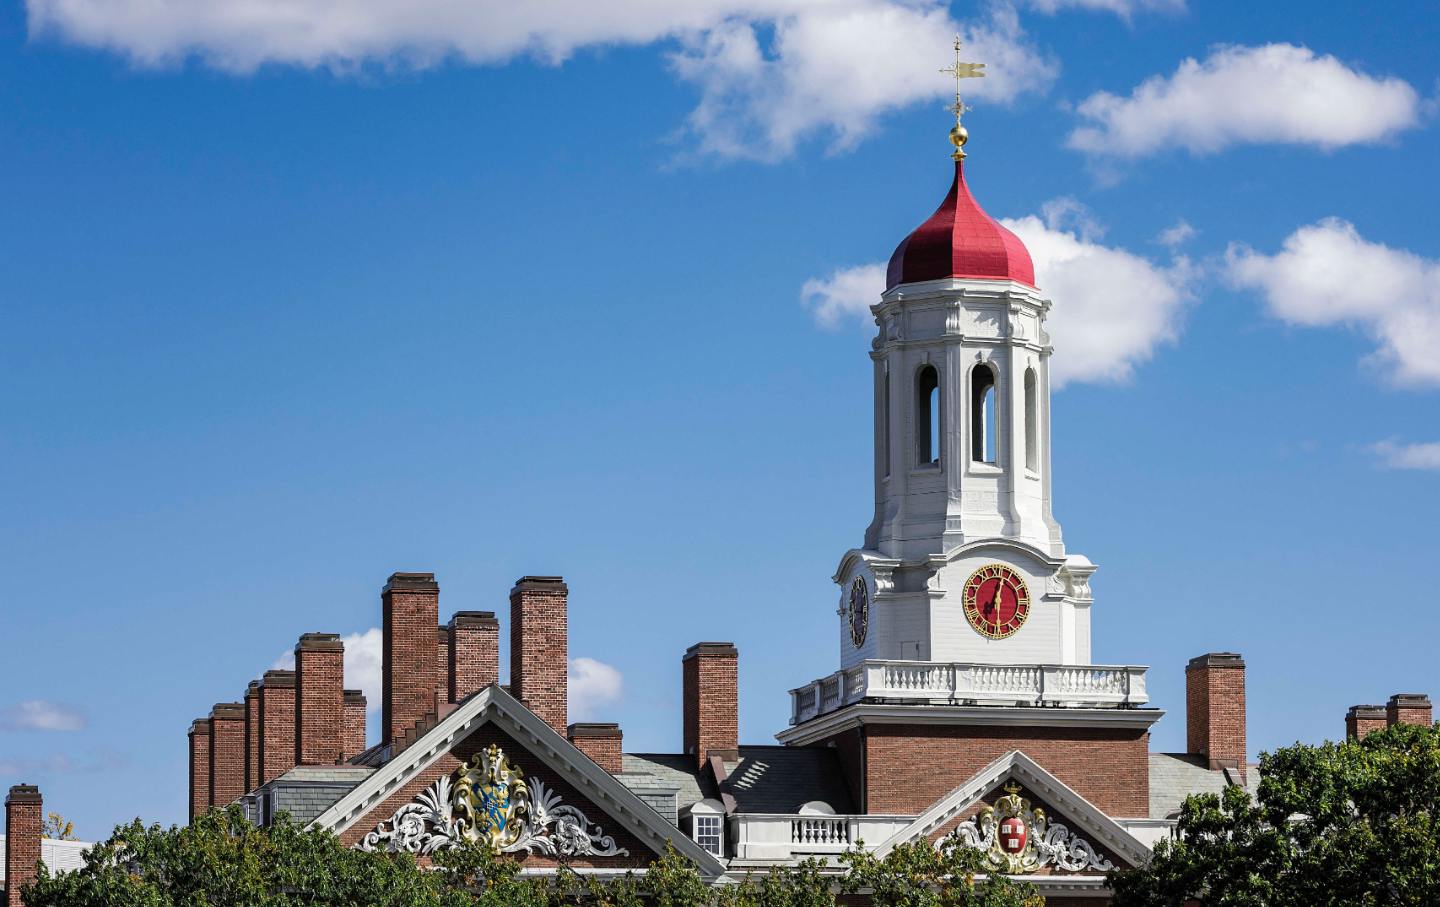 Dear Harvard, It’s Time to Reject Fossil Fuel Money